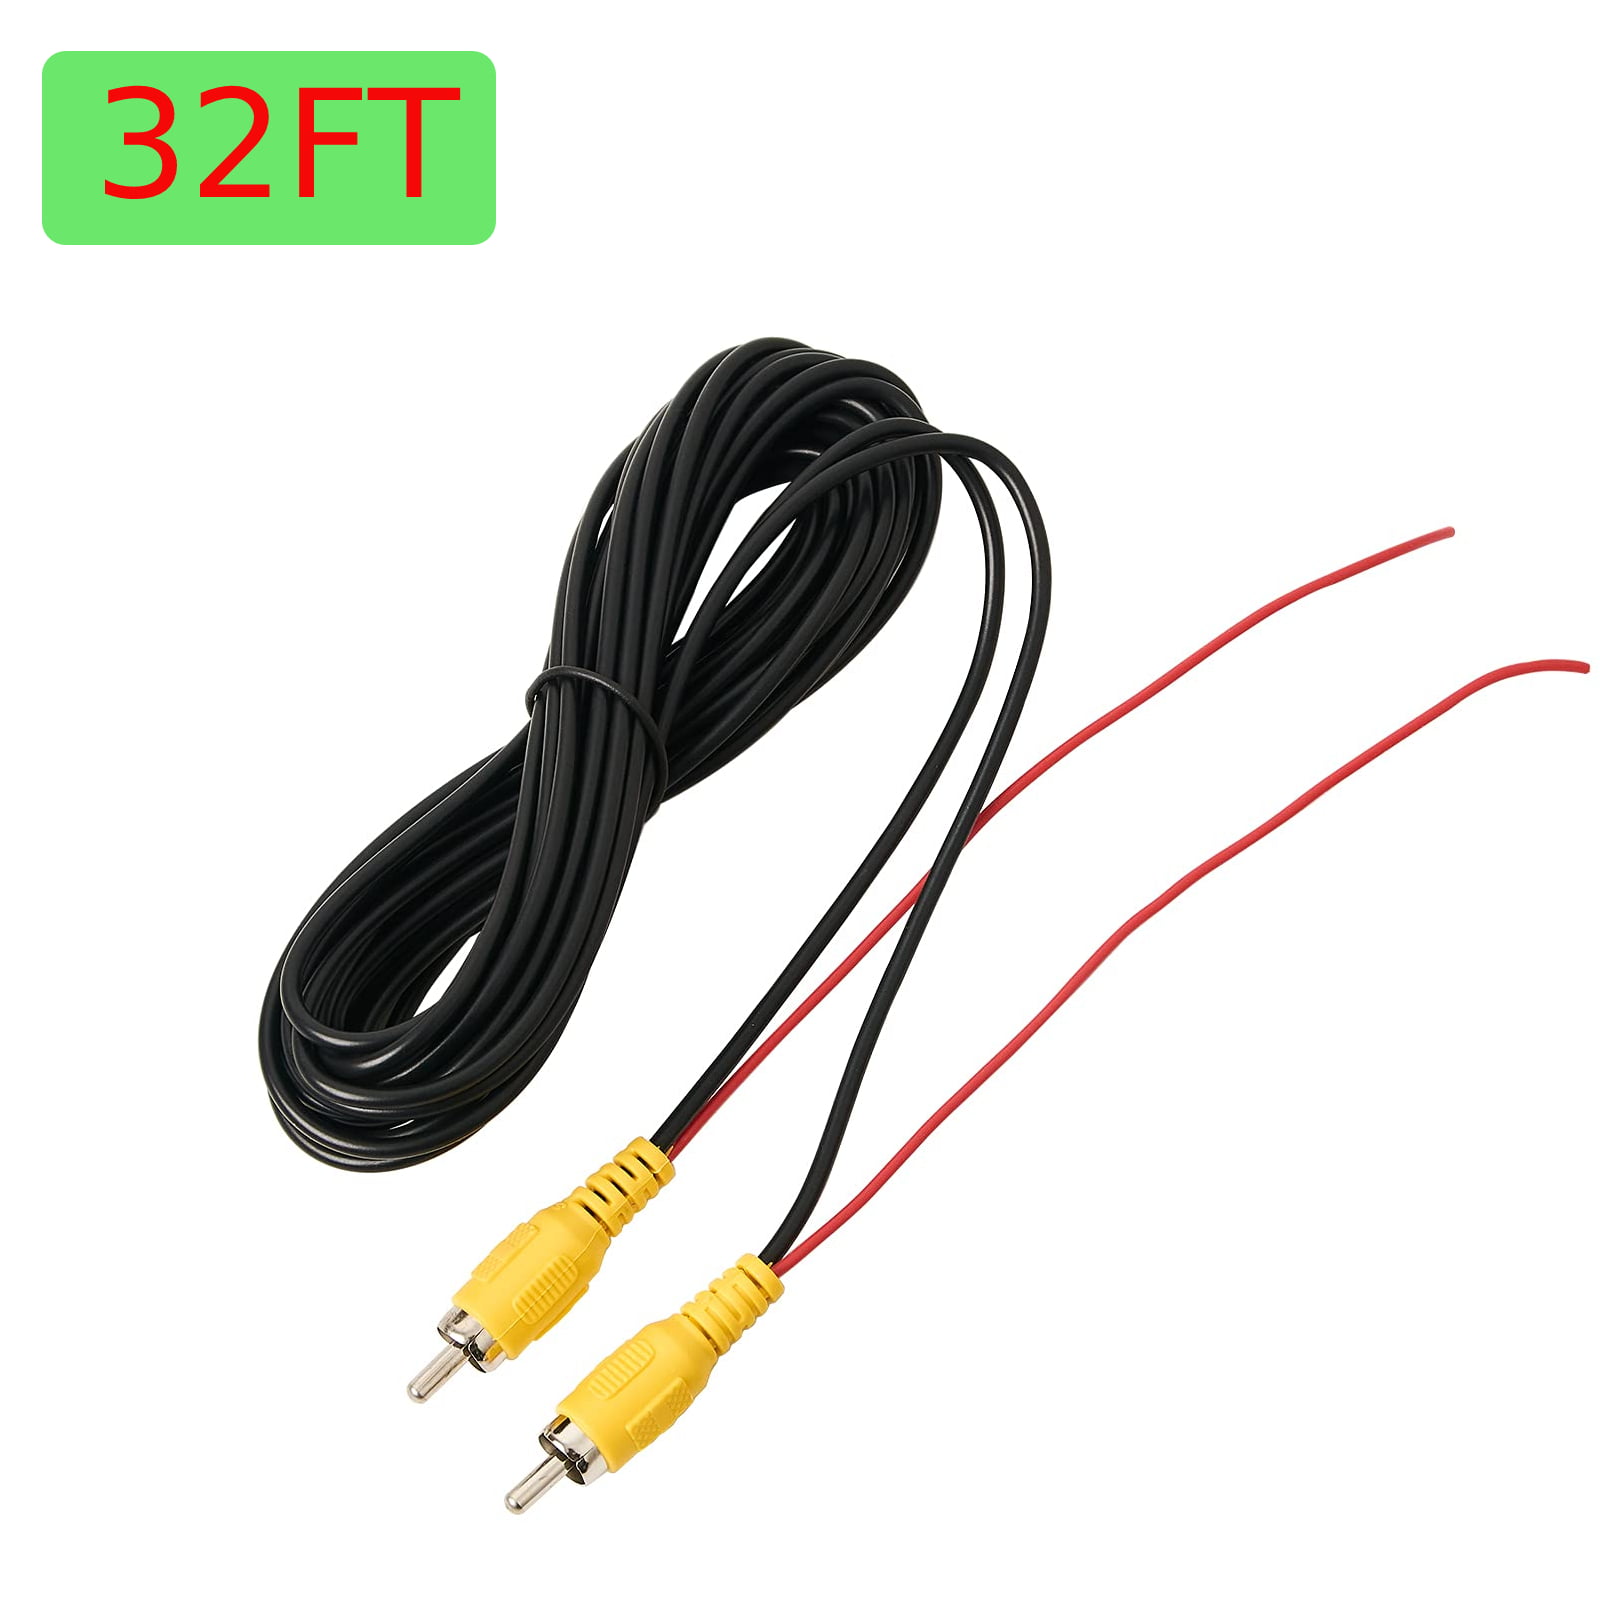 32 Ft 2 in 1 Phono Video Extension & DC Power Cable for CCTV Car Backup Monitor 